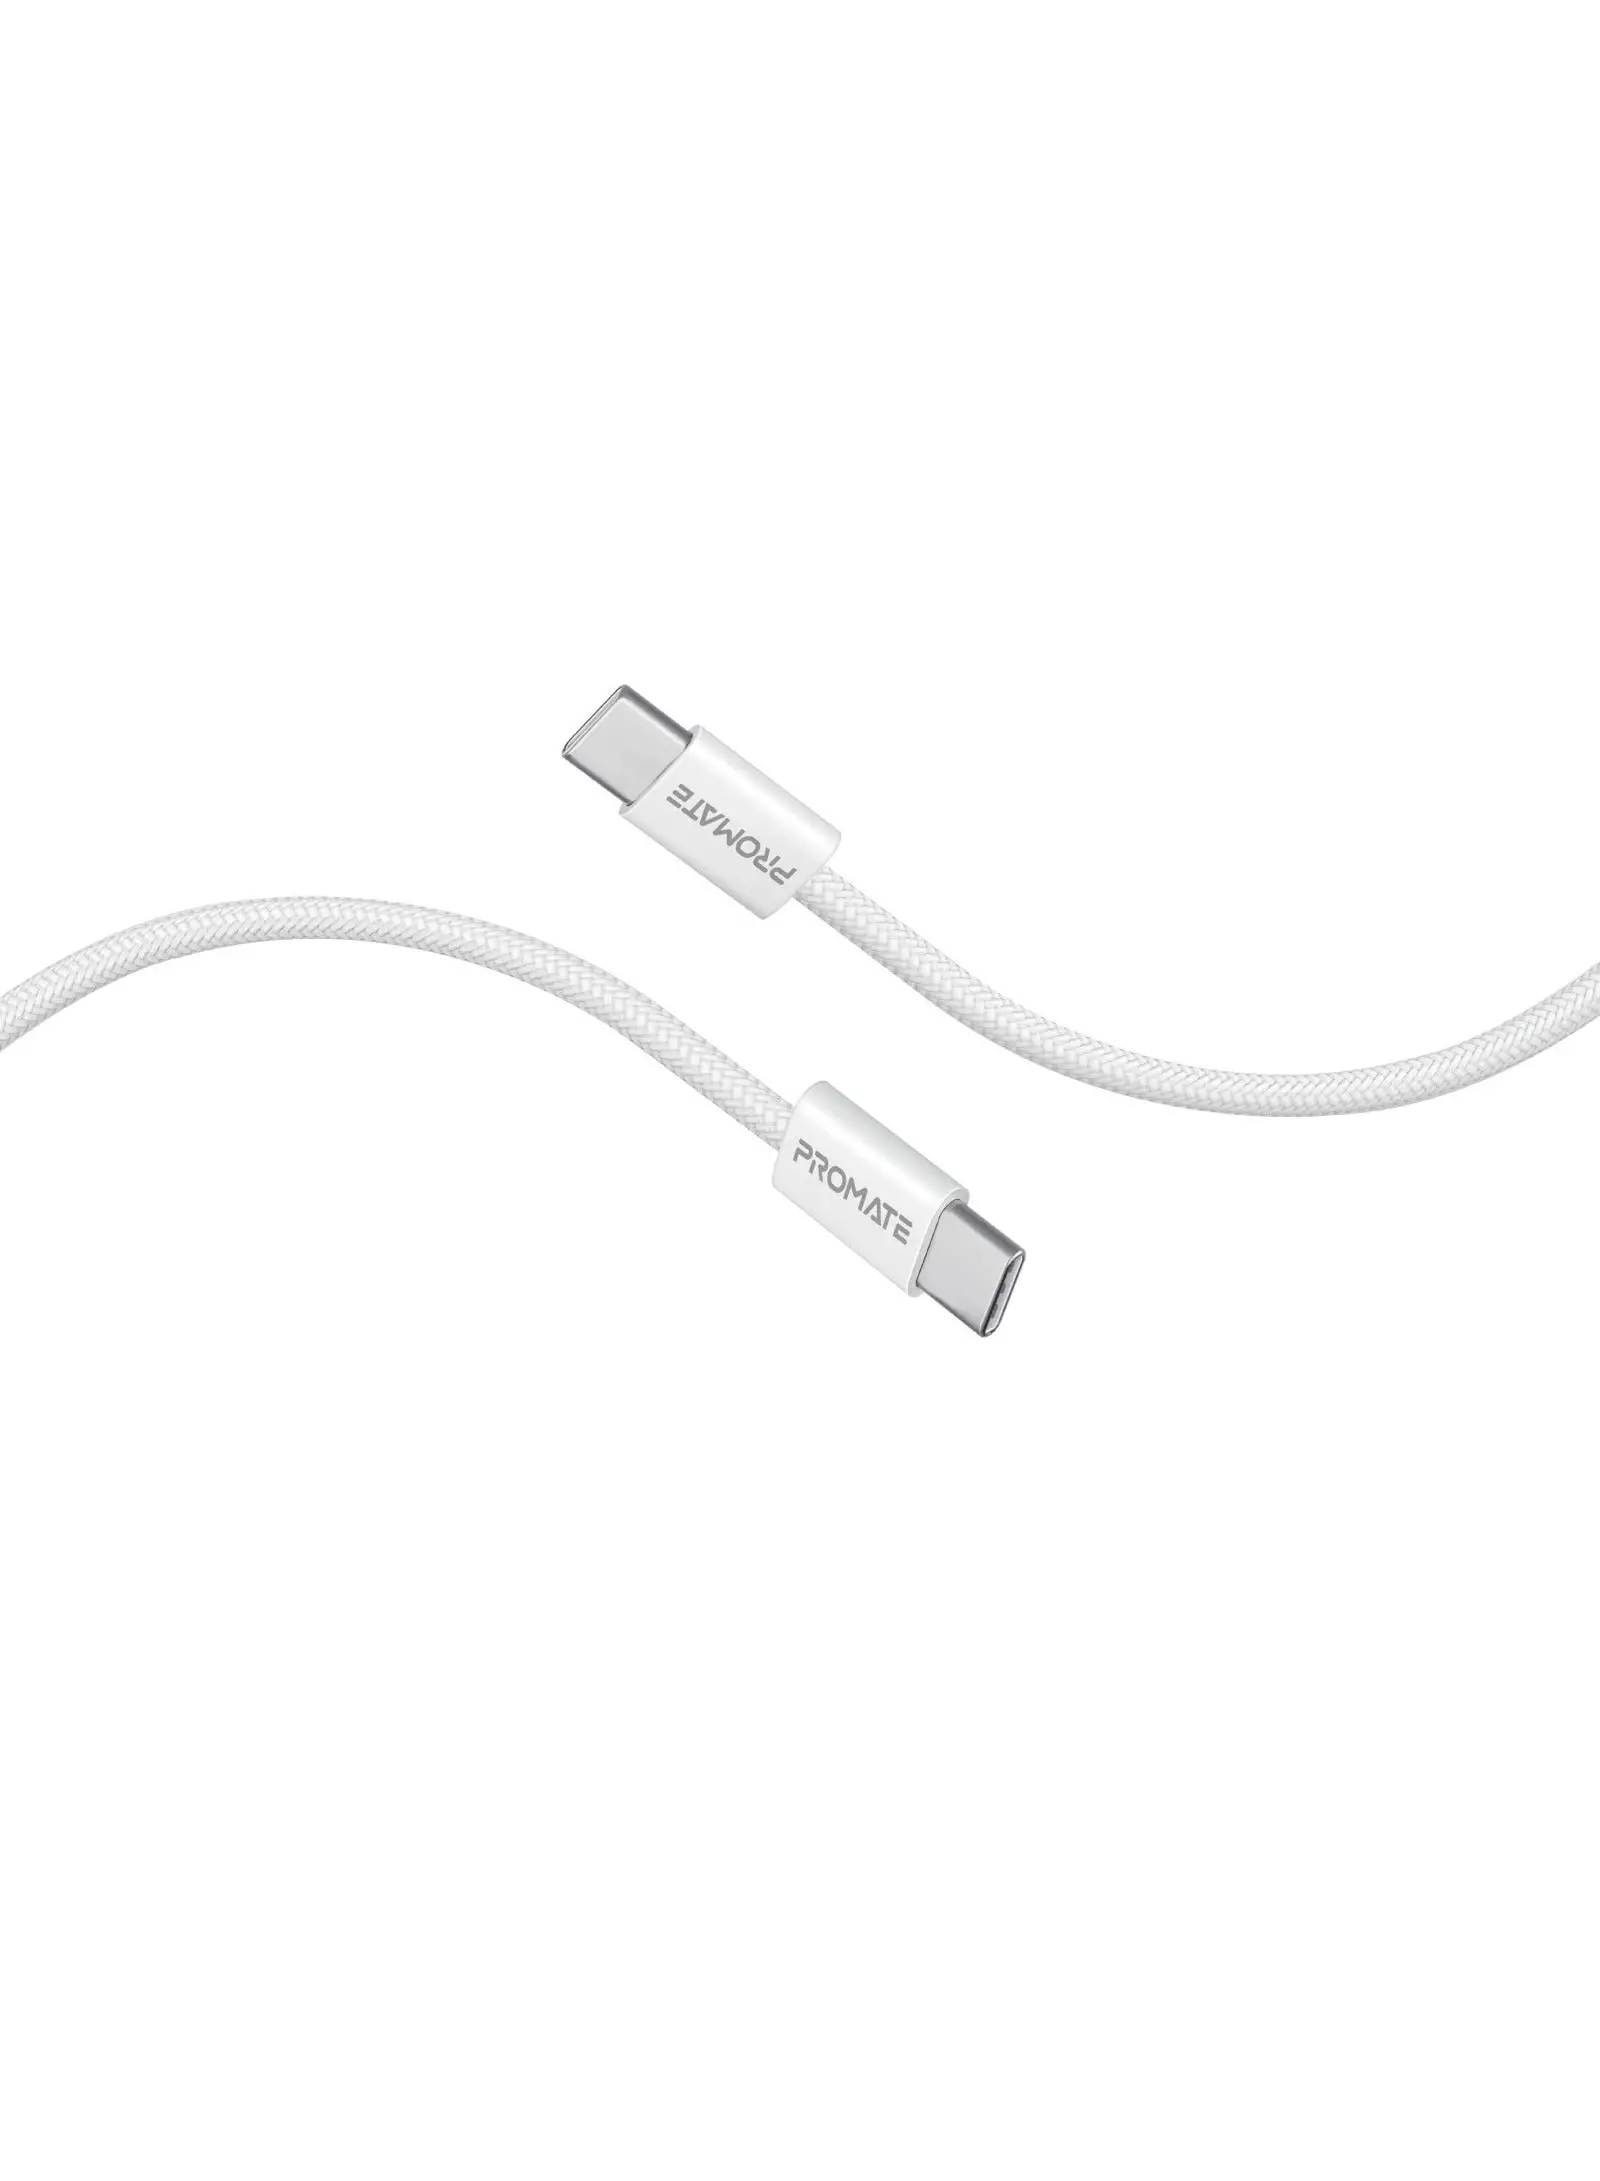 PROMATE USB-C Charging Cable, Powerful Sync Charge Type-C Cable with 60W Fast Power Delivery, 480Mbps Data Transfer and 200cm Tangle-Free Nylon Braided Cord, EcoLine-CC200 White